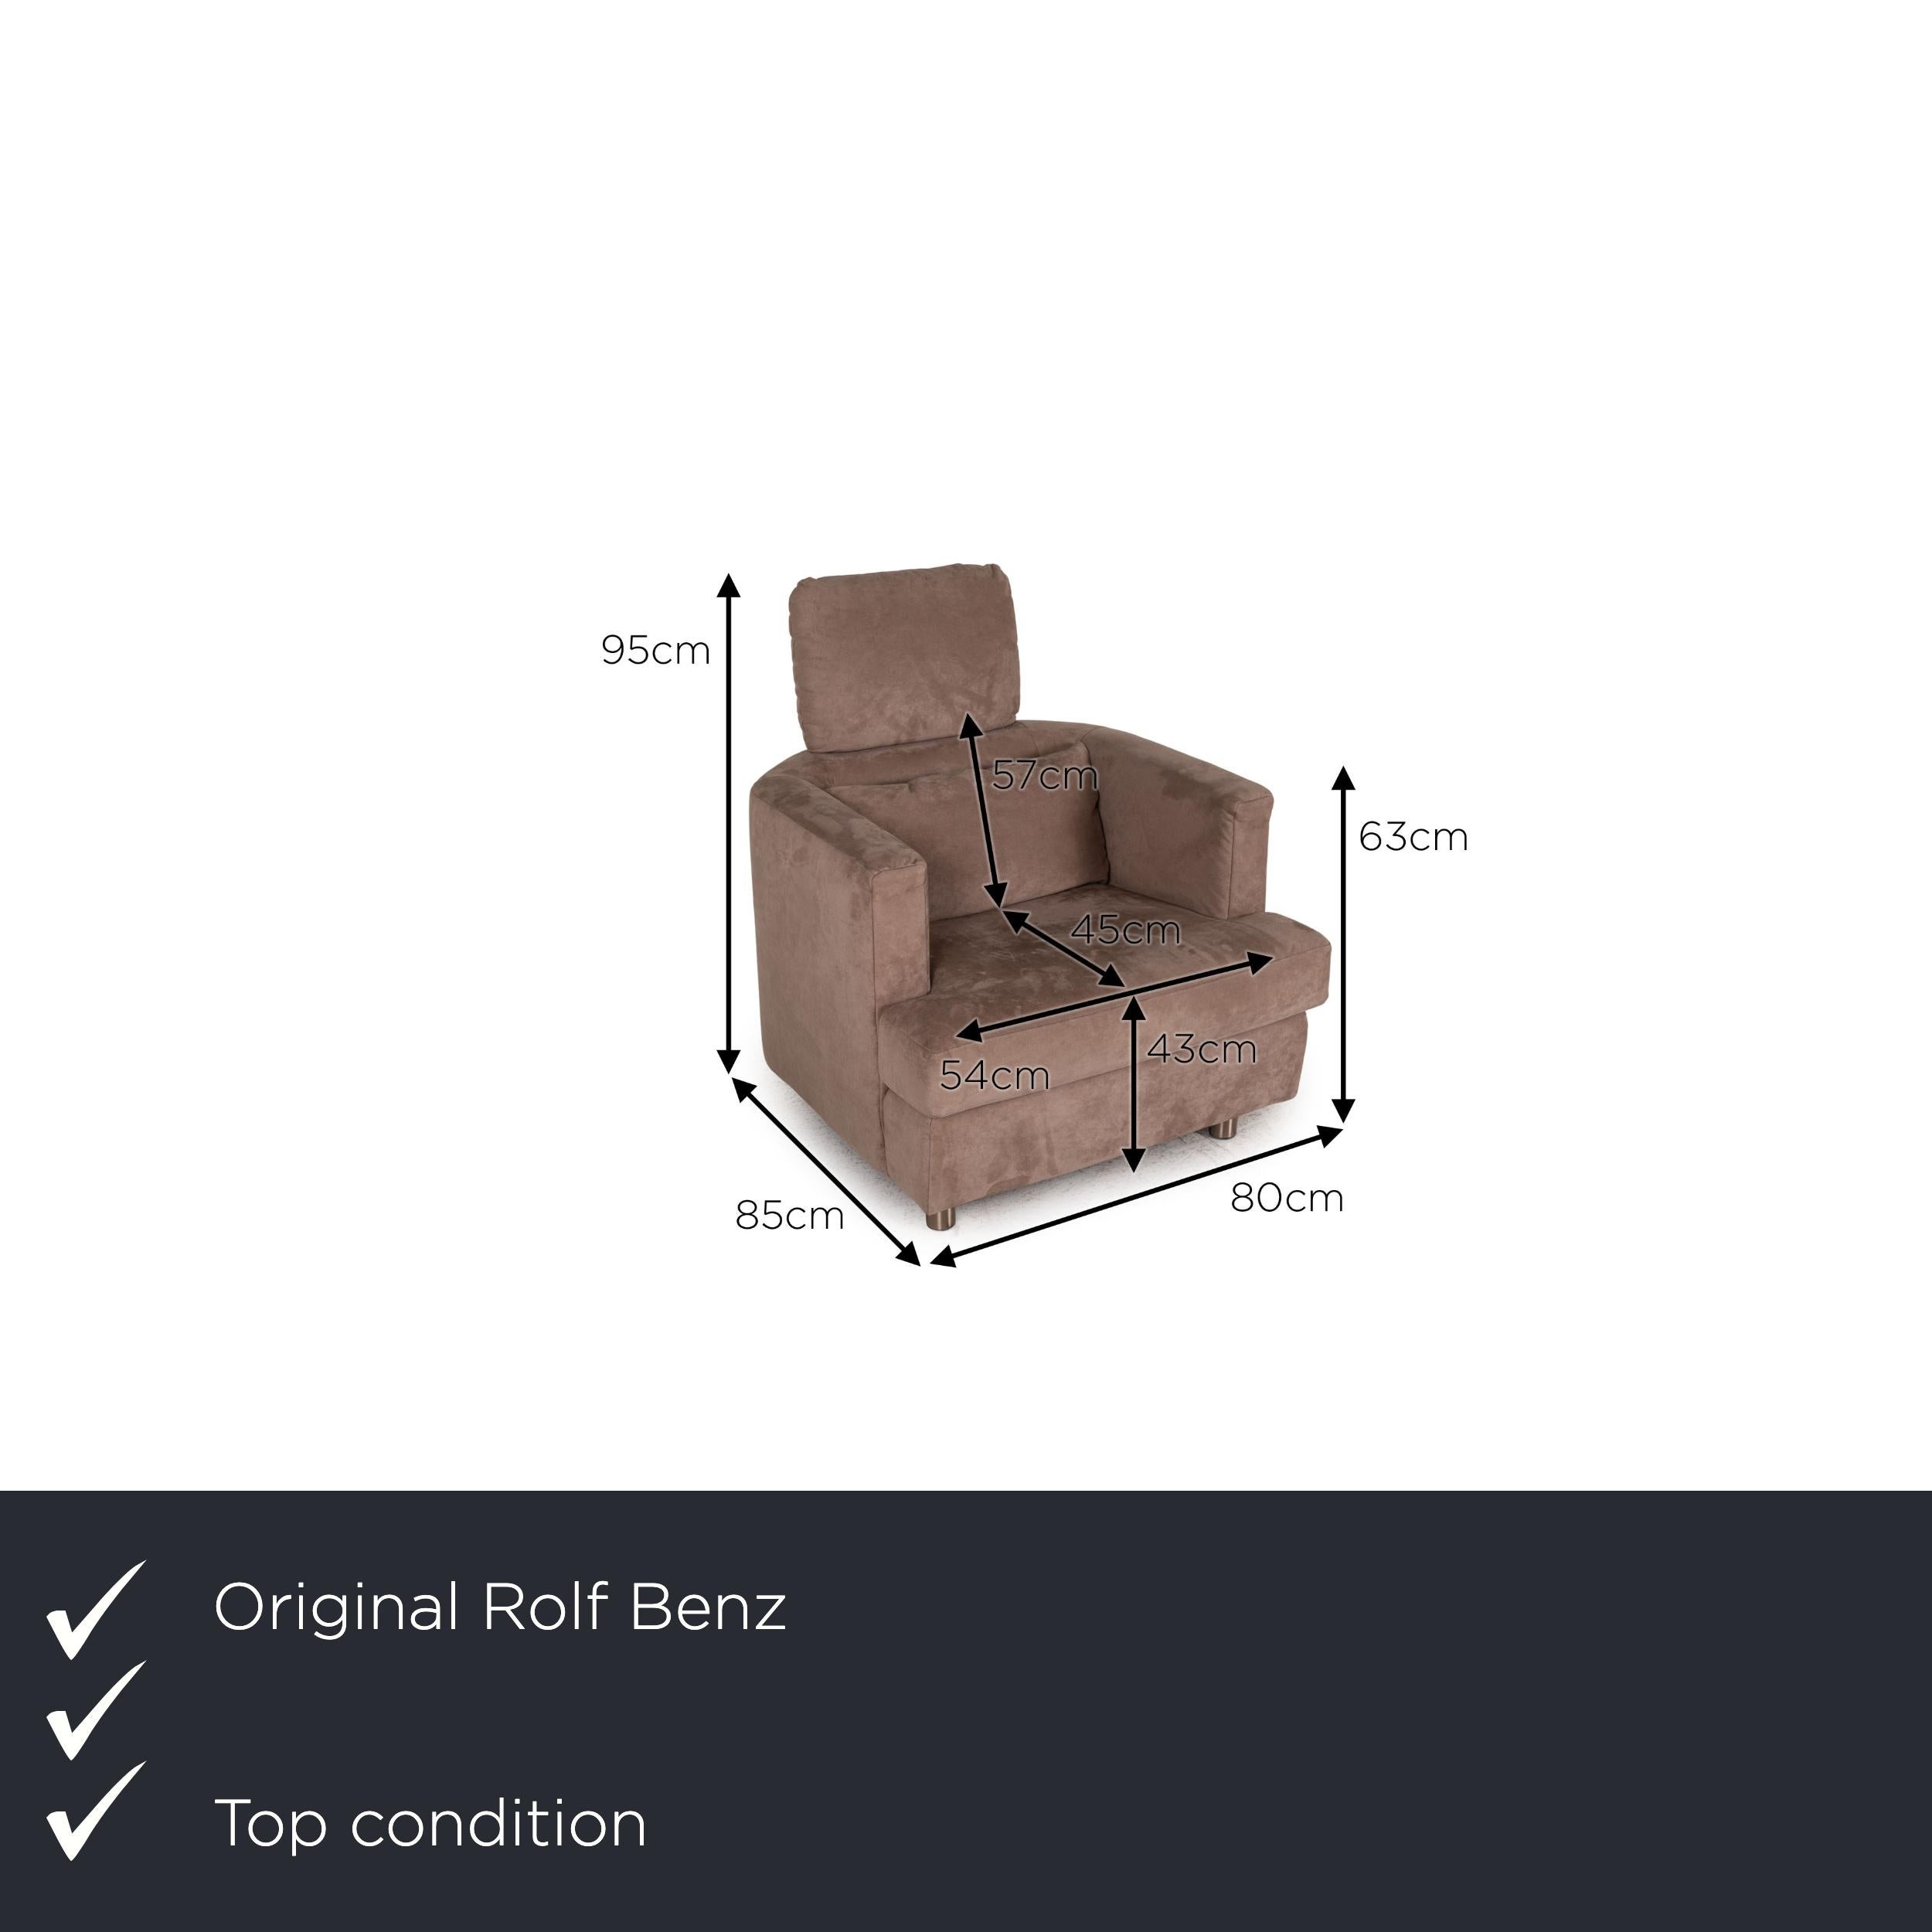 We present to you a Rolf Benz fabric armchair brown.

Product measurements in centimeters:

Depth: 85
Width: 80
Height: 95
Seat height: 43
Rest height: 63
Seat depth: 45
Seat width: 54
Back height: 57.

     